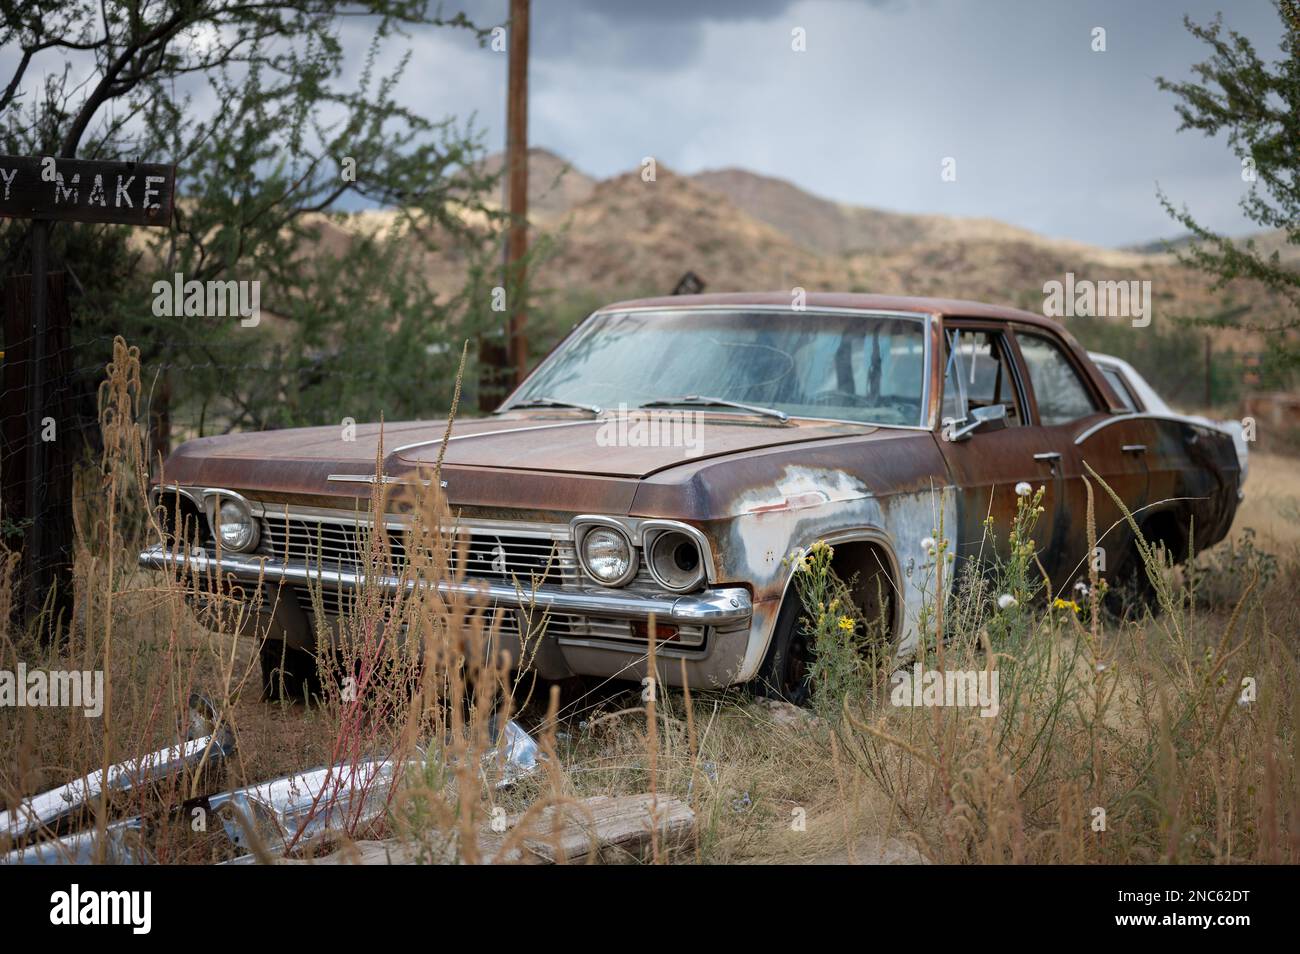 An old fourth generation Chevrolet Biscayne abandoned in a remote countryside Stock Photo